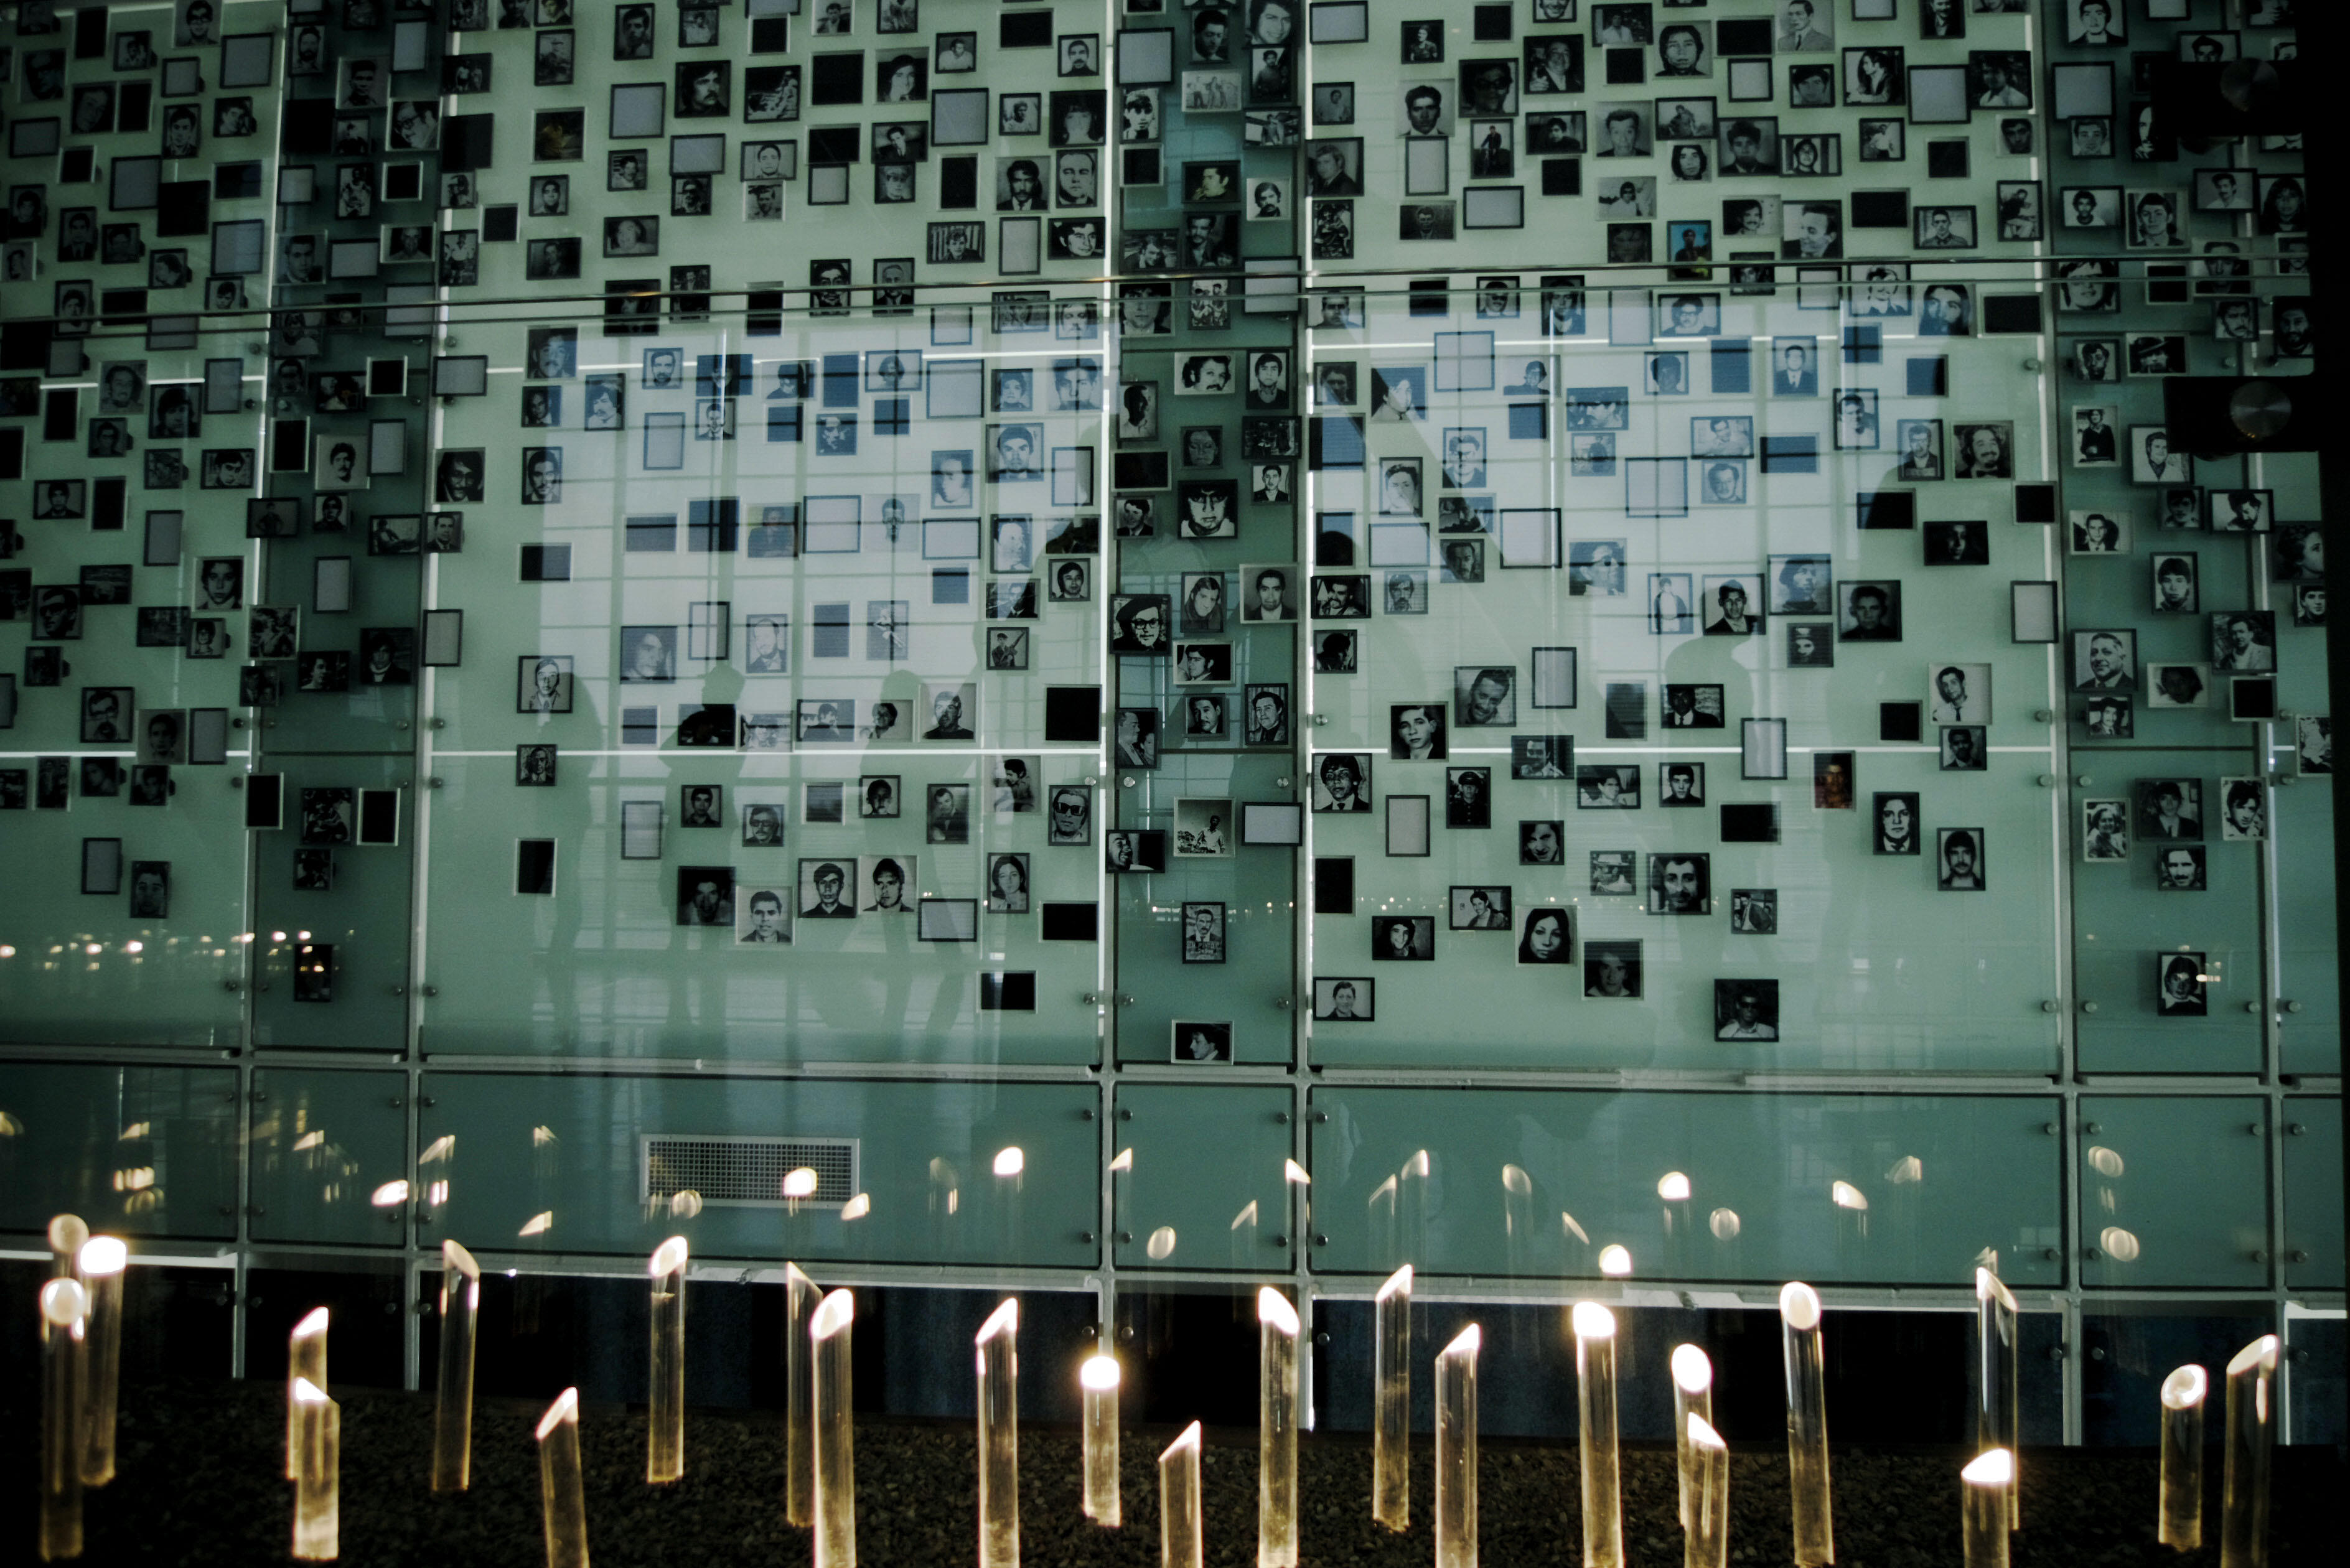 A memorial wall of photos of the murdered and disappeared from the dictatorship, displayed in Chile’s Museum of Memory and Human Rights, which was commissioned by President Michelle Bachelet. (Photo by Francisco Javier Cornejos.)